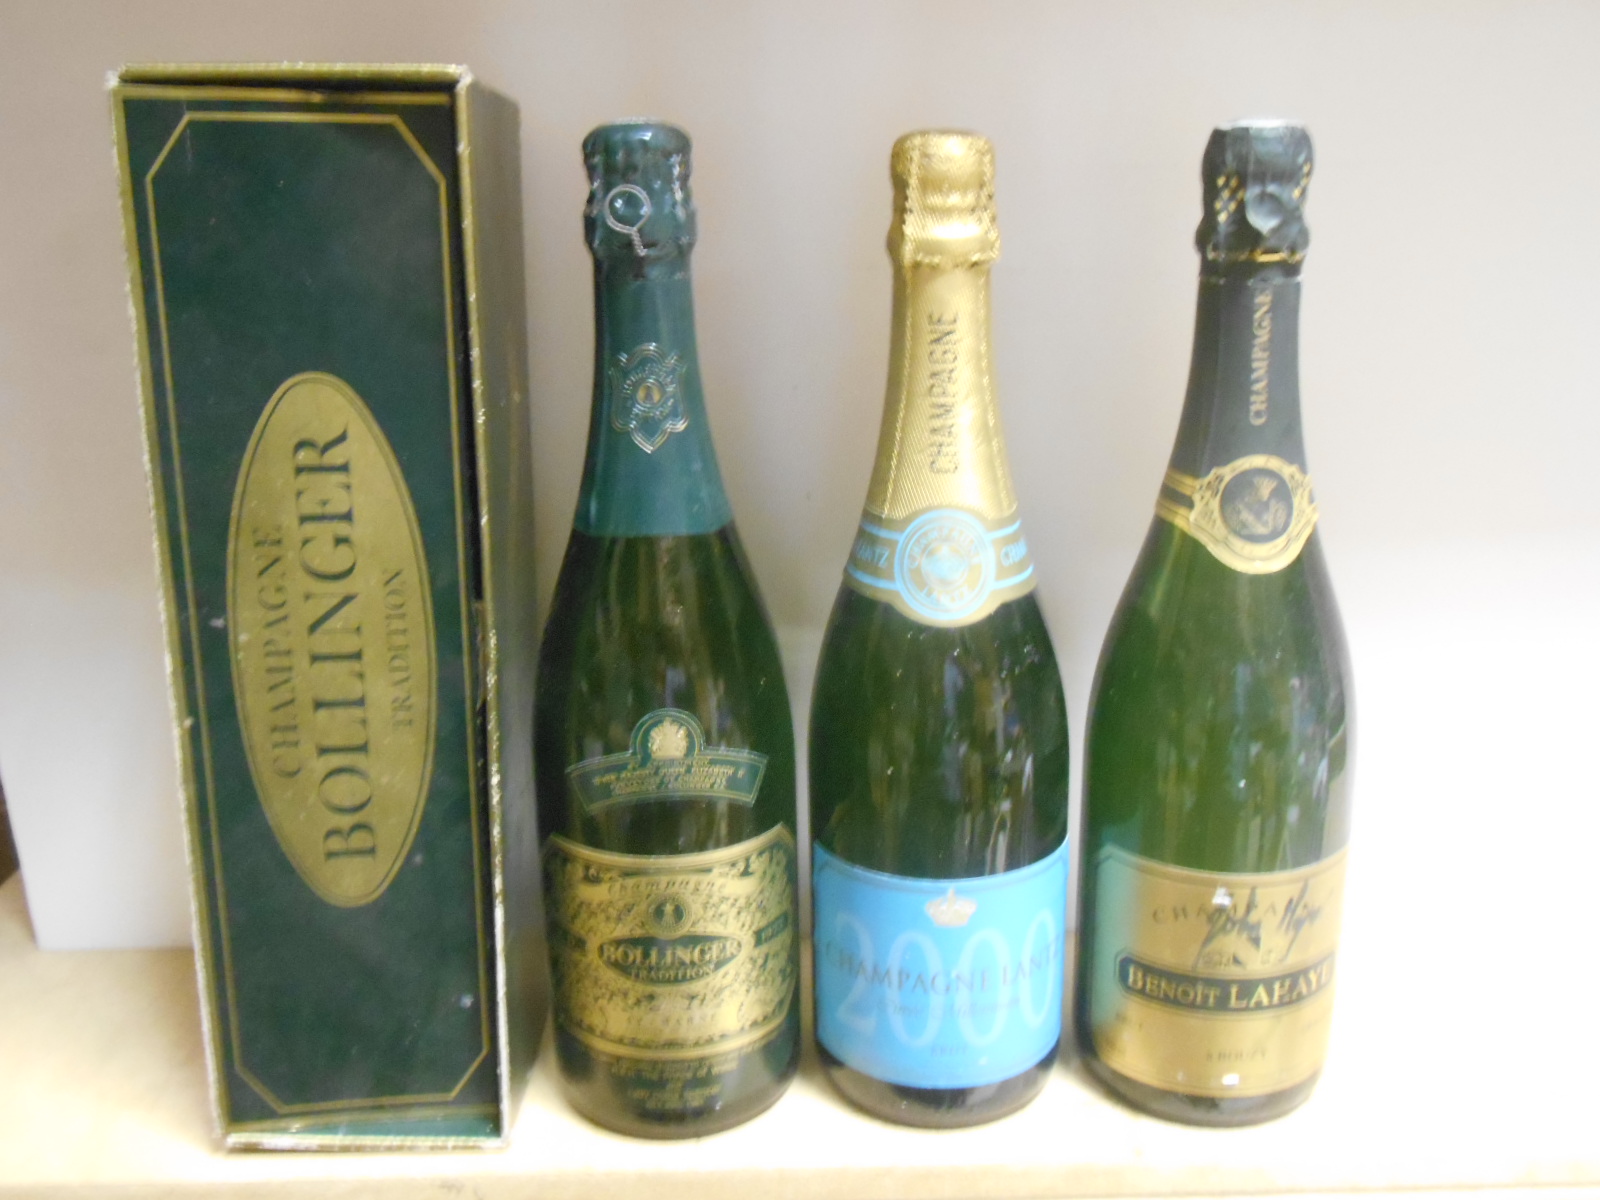 Bollinger Tradition 1973, one bottle, boxed (shipped for the Royal Wedding 1981); two other